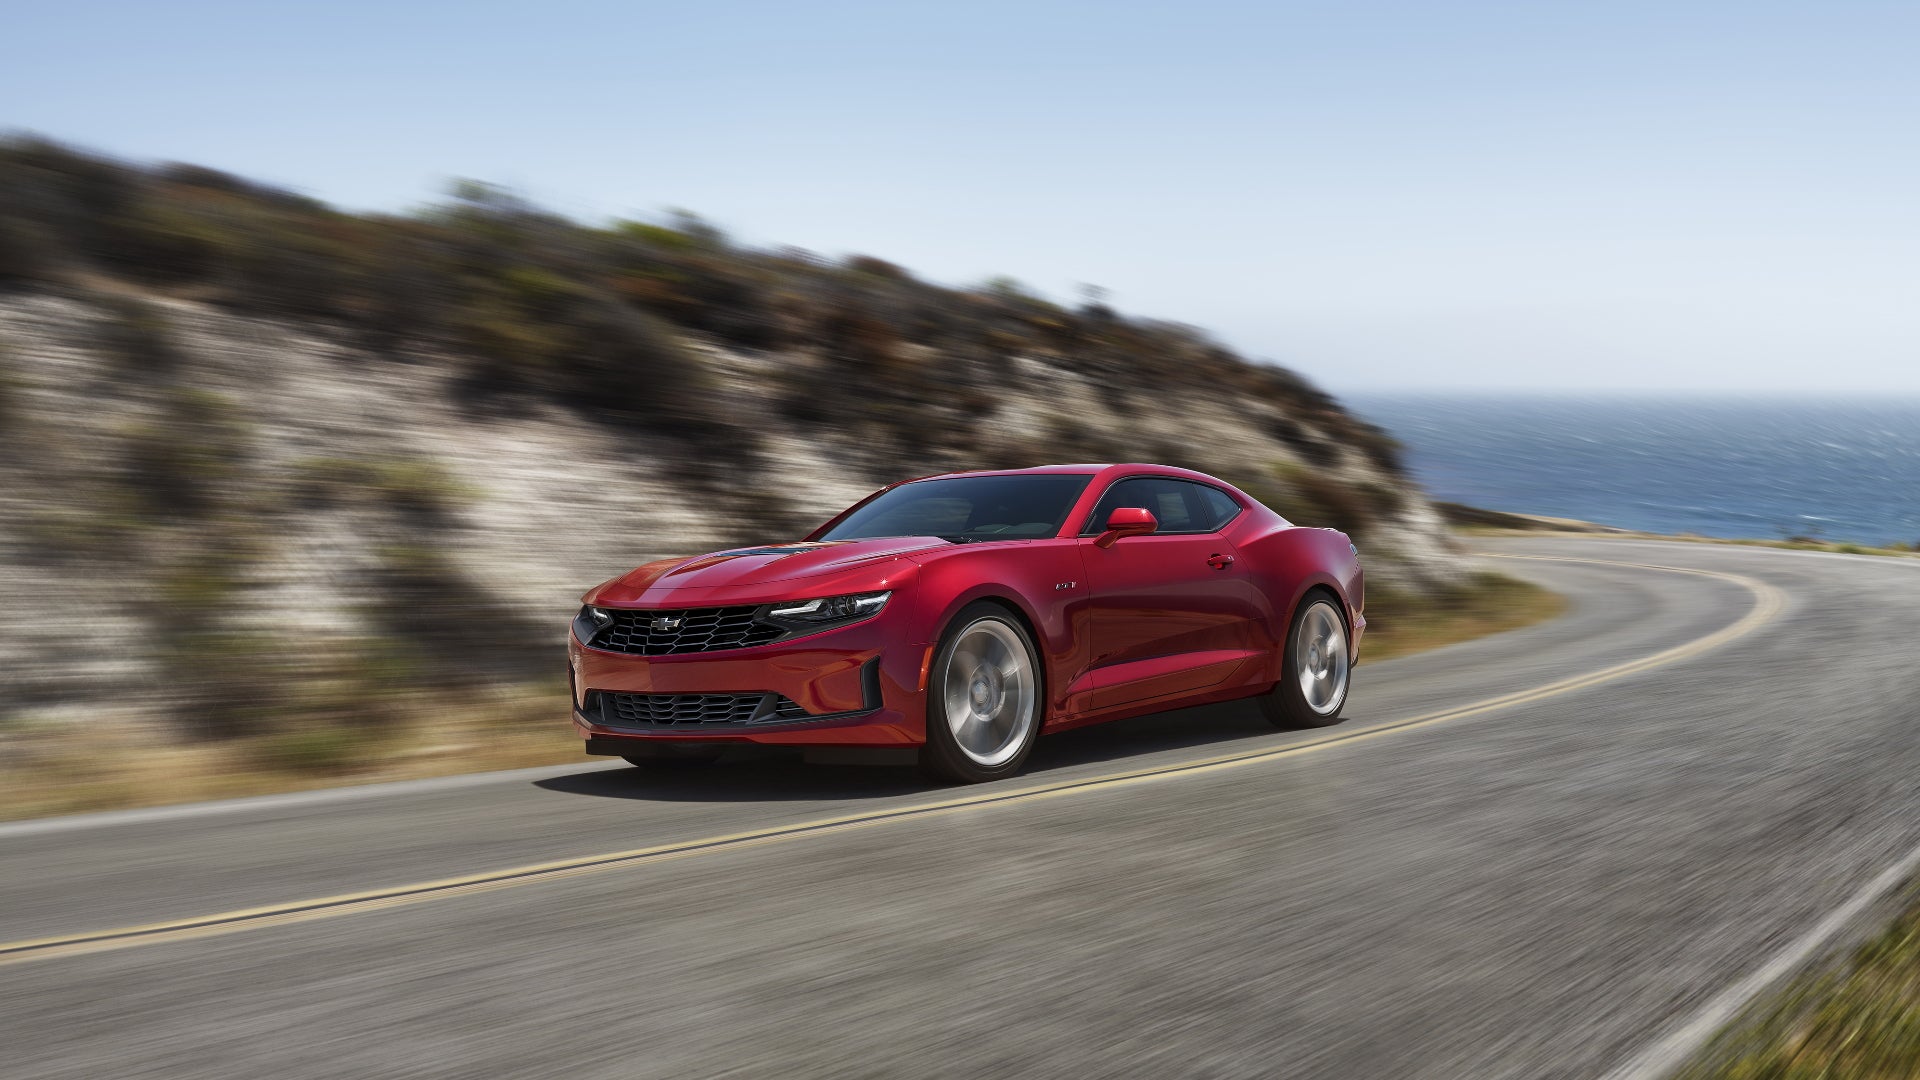 Chevrolet Camaro Sales Are Utterly Collapsing